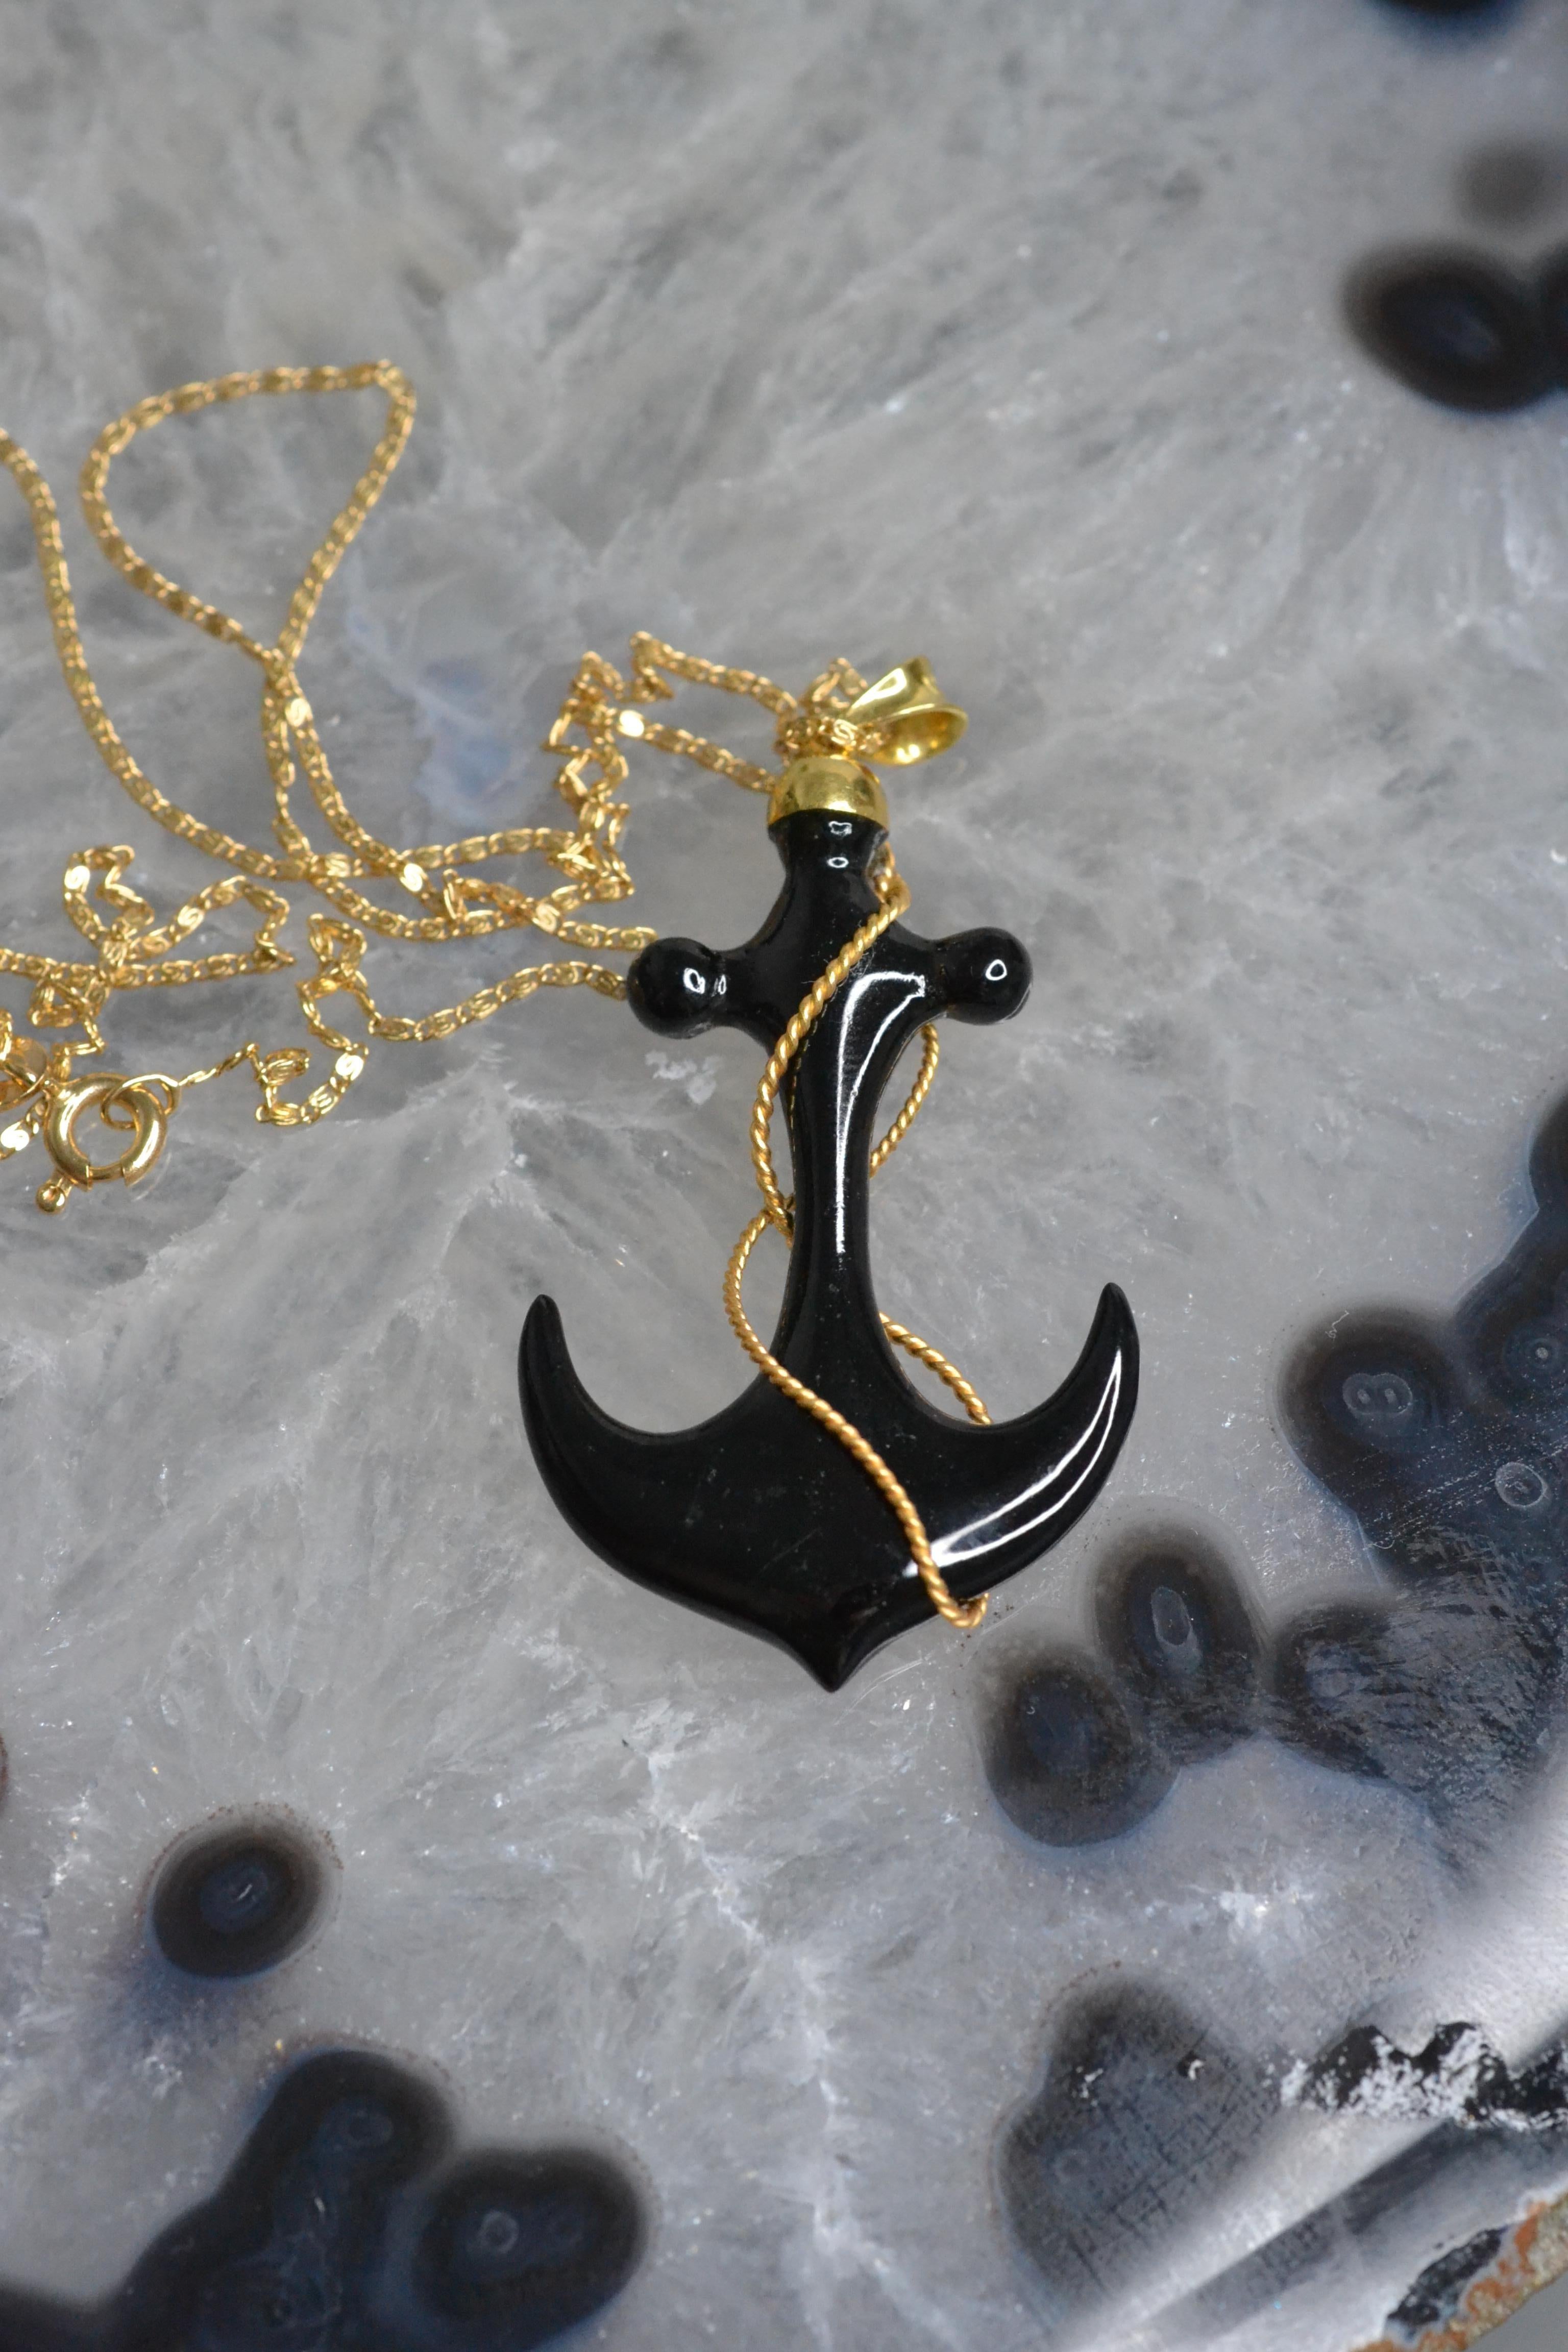 Vintage 18k Gold Onyx Anchor Pendant Limited Edition

These stunning anchor pendants come on a solid 18k yellow gold chain and make for the perfect statement necklace. In a variety of colours, these pendants are perfect for a day out on the boat, or